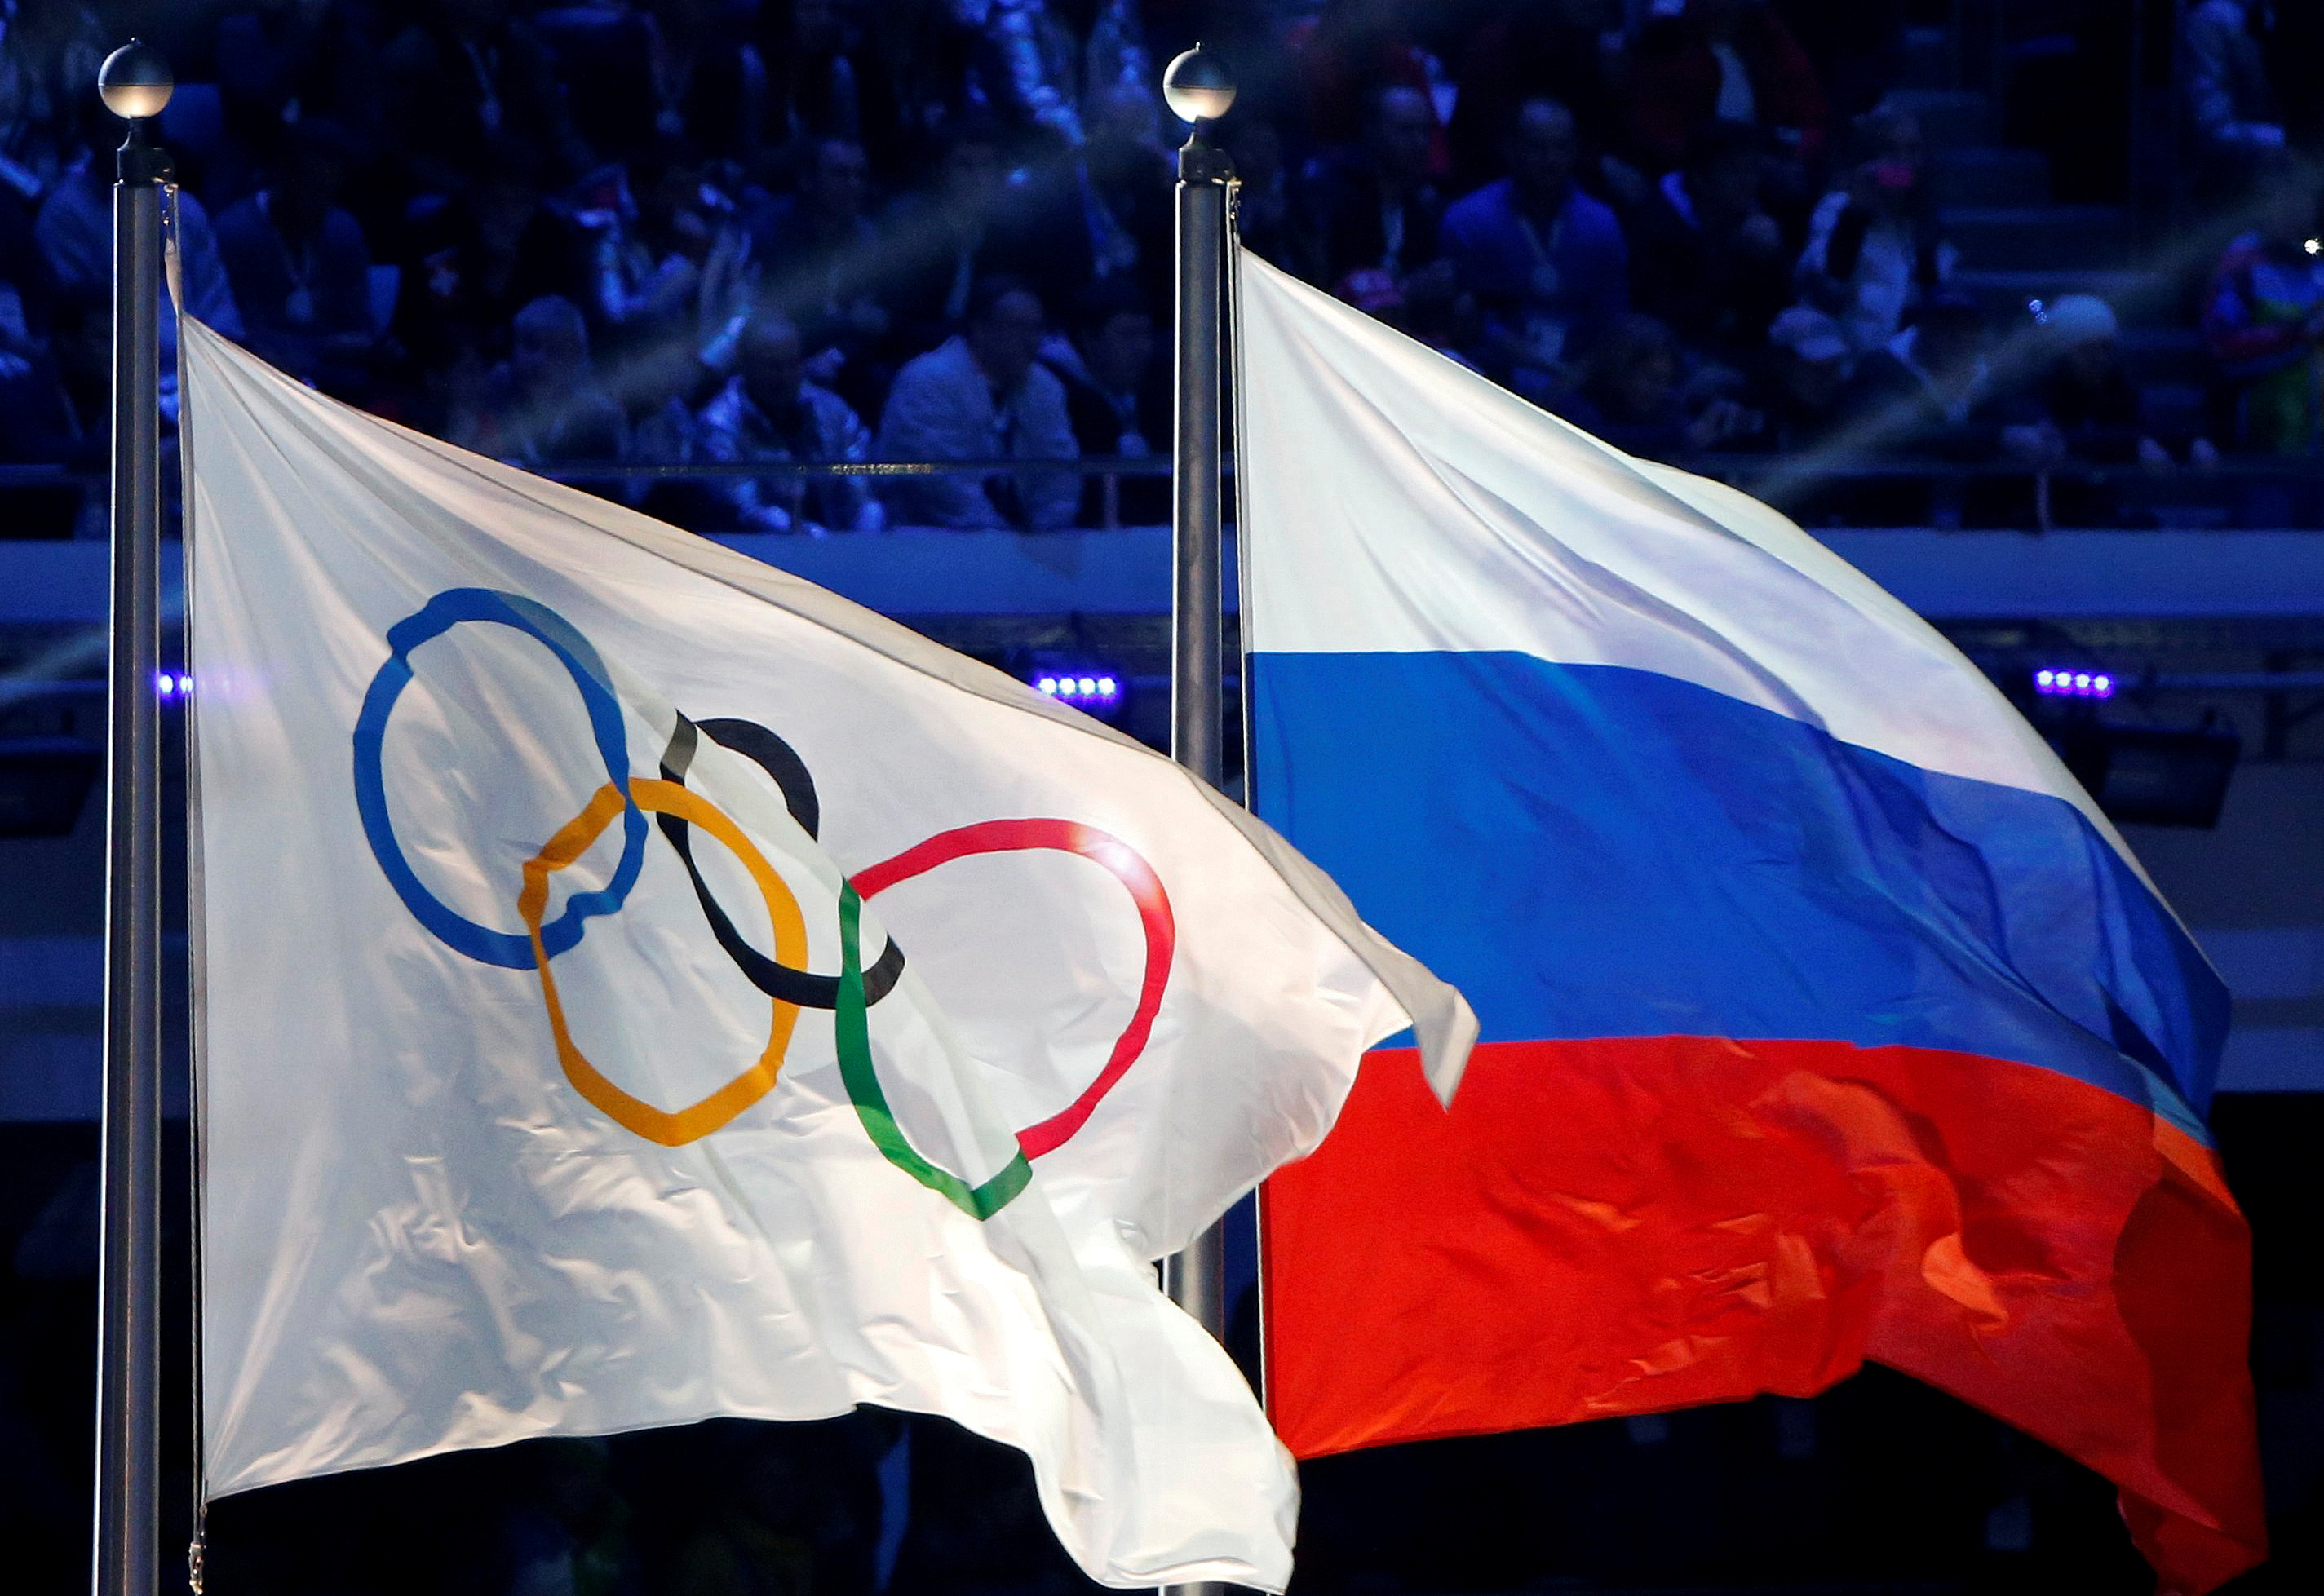 FILE PHOTO: Russian national flag and Olympic flag are seen during closing ceremony for 2014 Sochi Winter Olympics